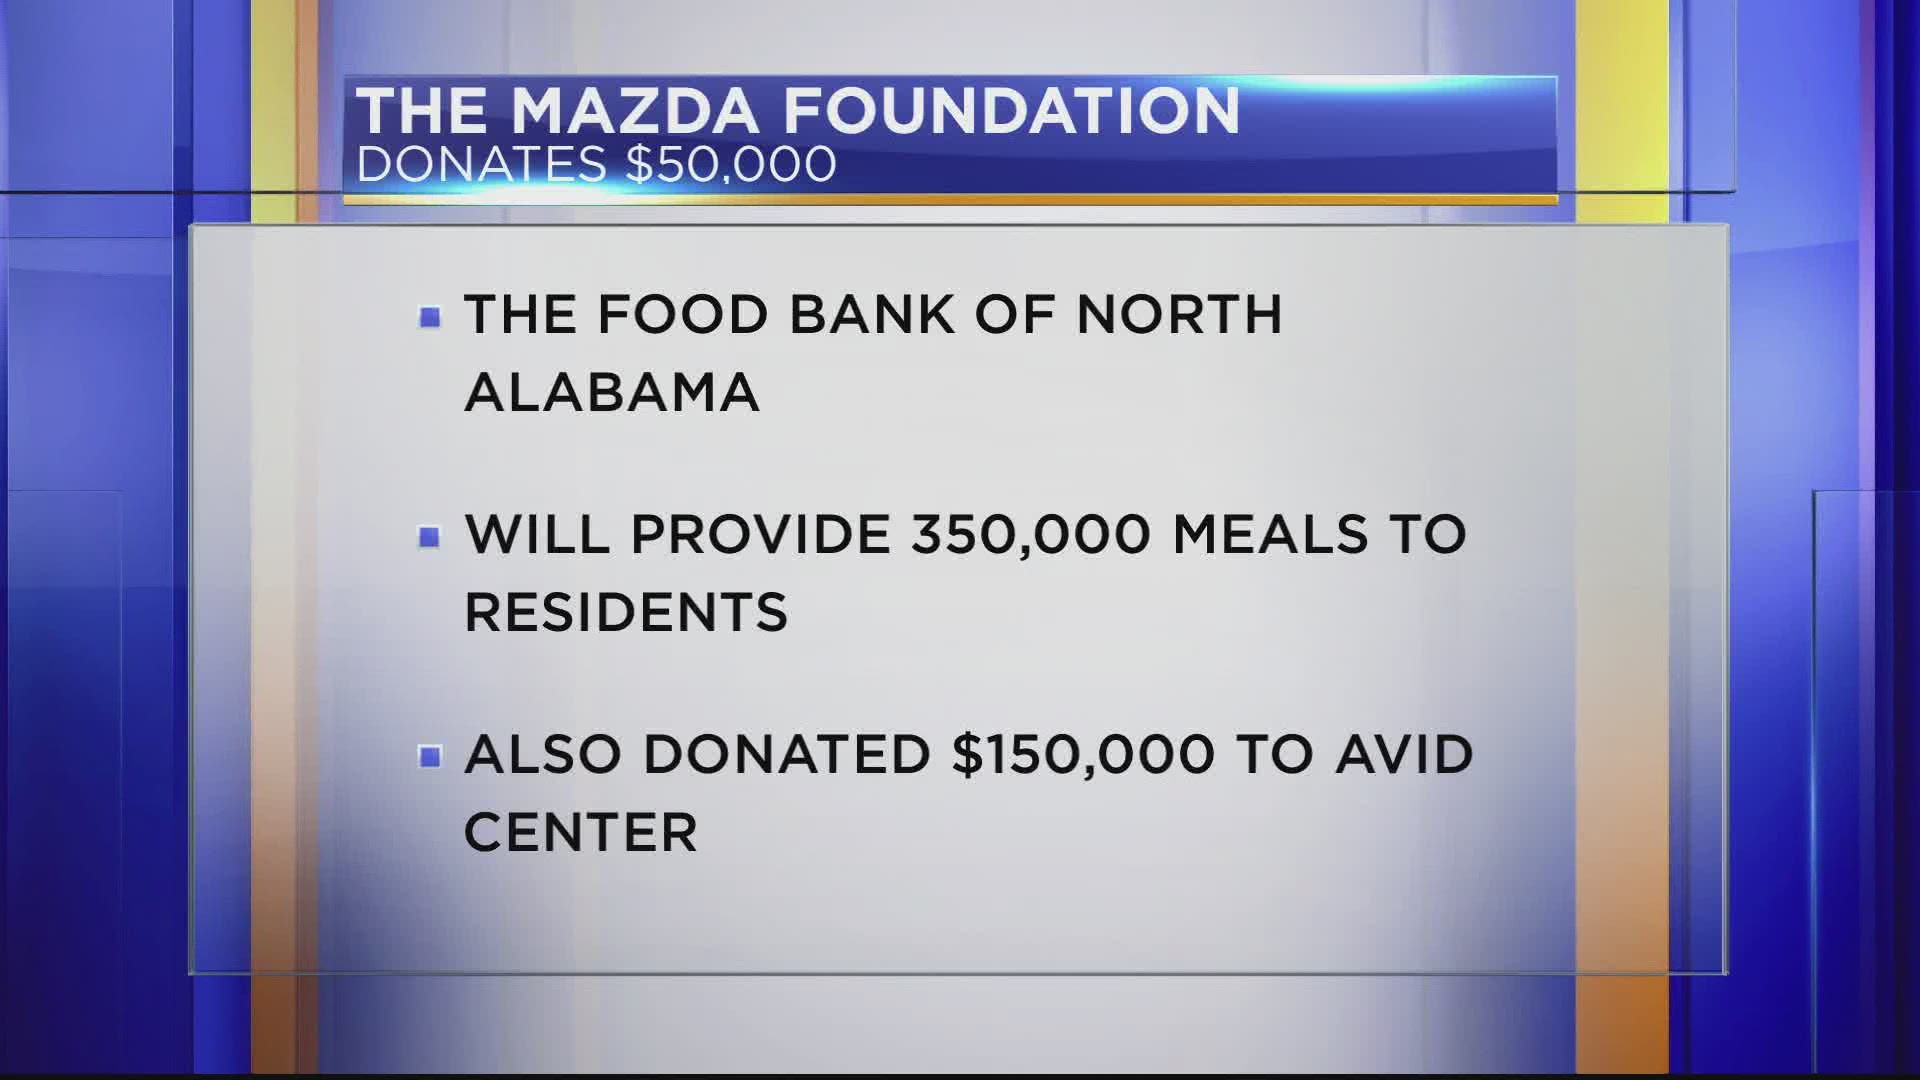 The foundation awarded a $50,000 grant to the Food Bank of North Alabama and a $150,000 grant to the AVID Center.